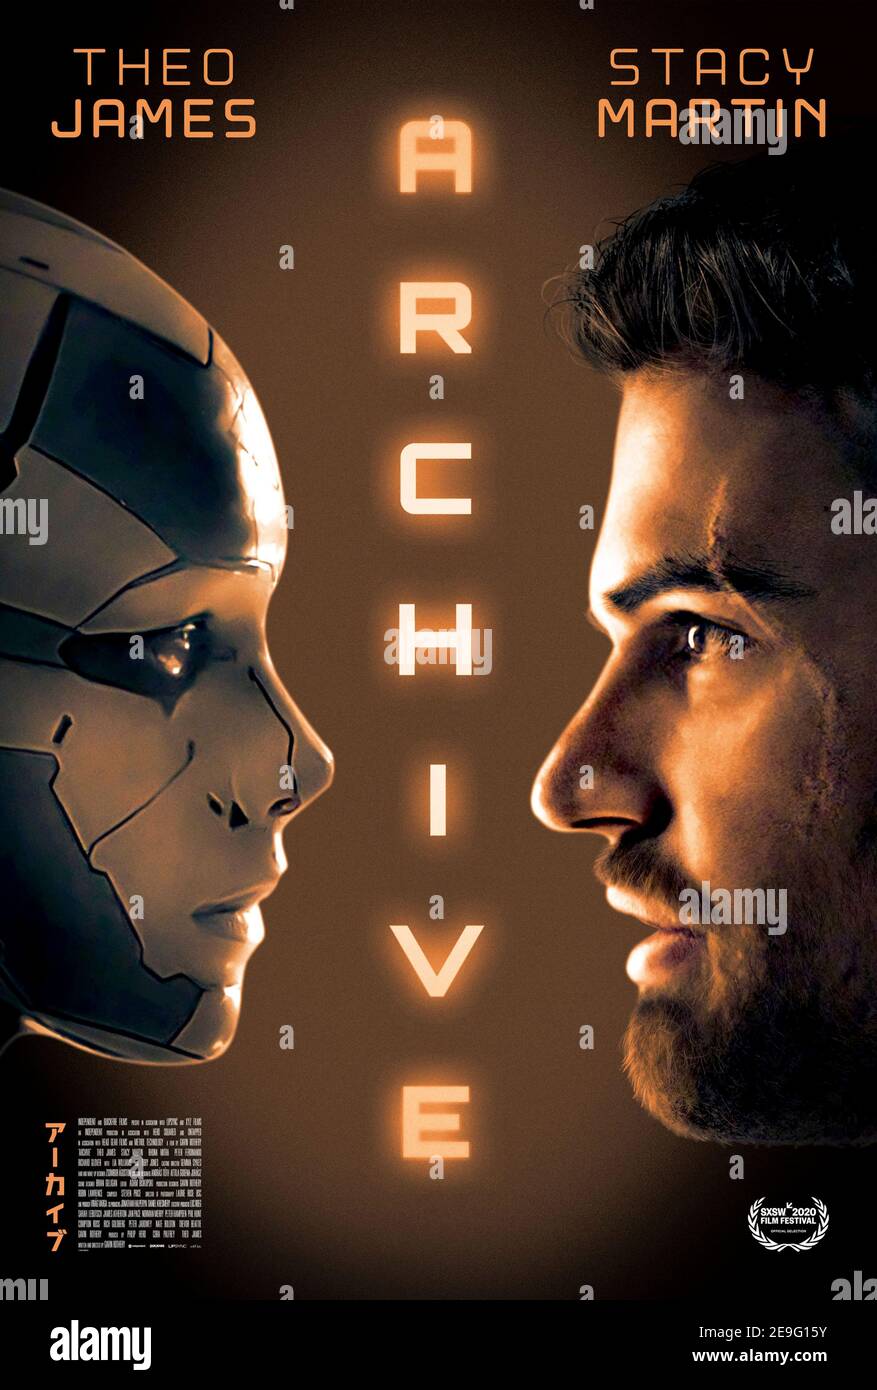 Archive (2020) directed by Gavin Rothery and starring Theo James, Stacy Martin and Rhona Mitra. In the year 2038 a man works on an android to try and be reunited with his dead wife. Stock Photo